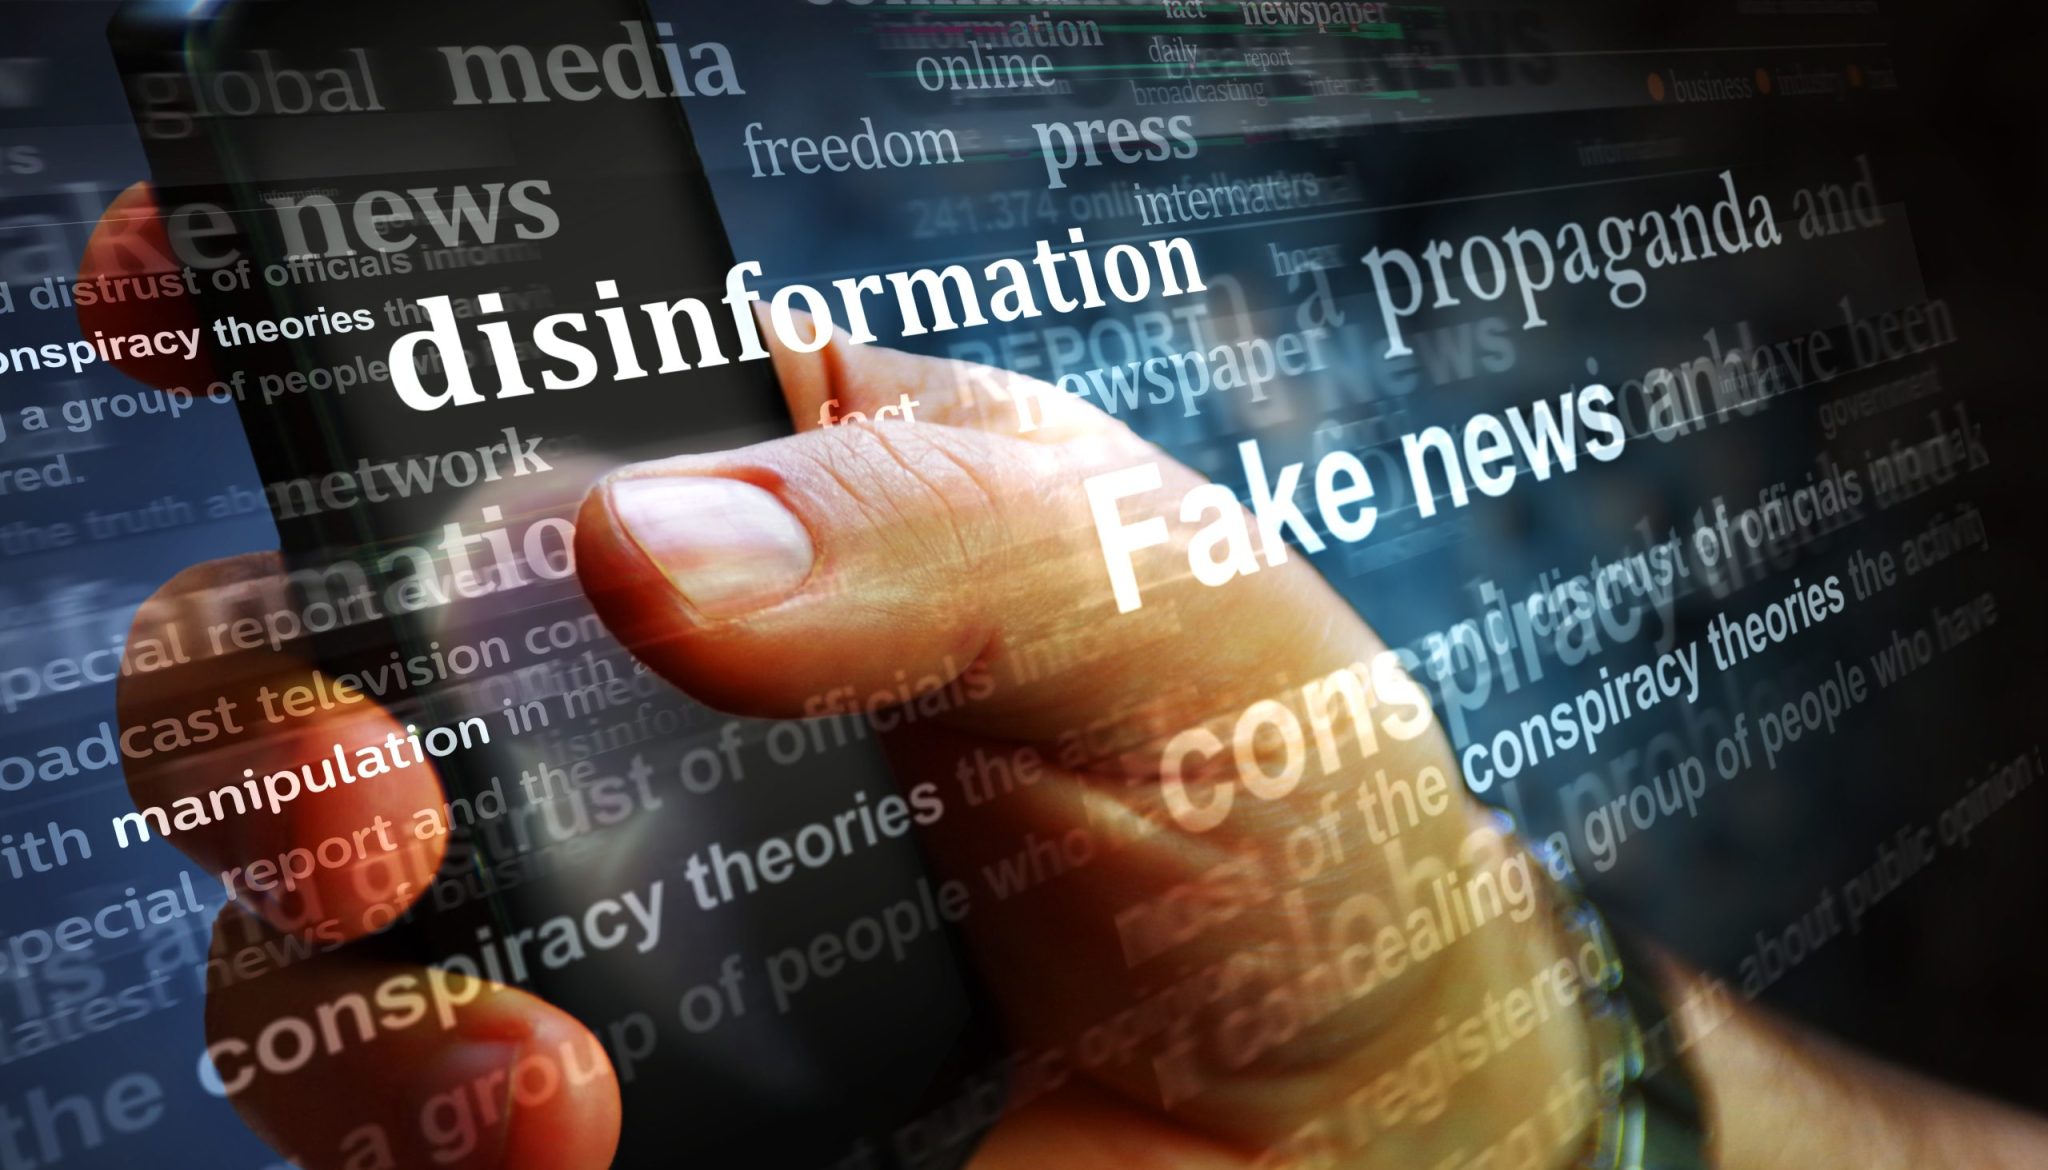 abstract depiction of disinformation